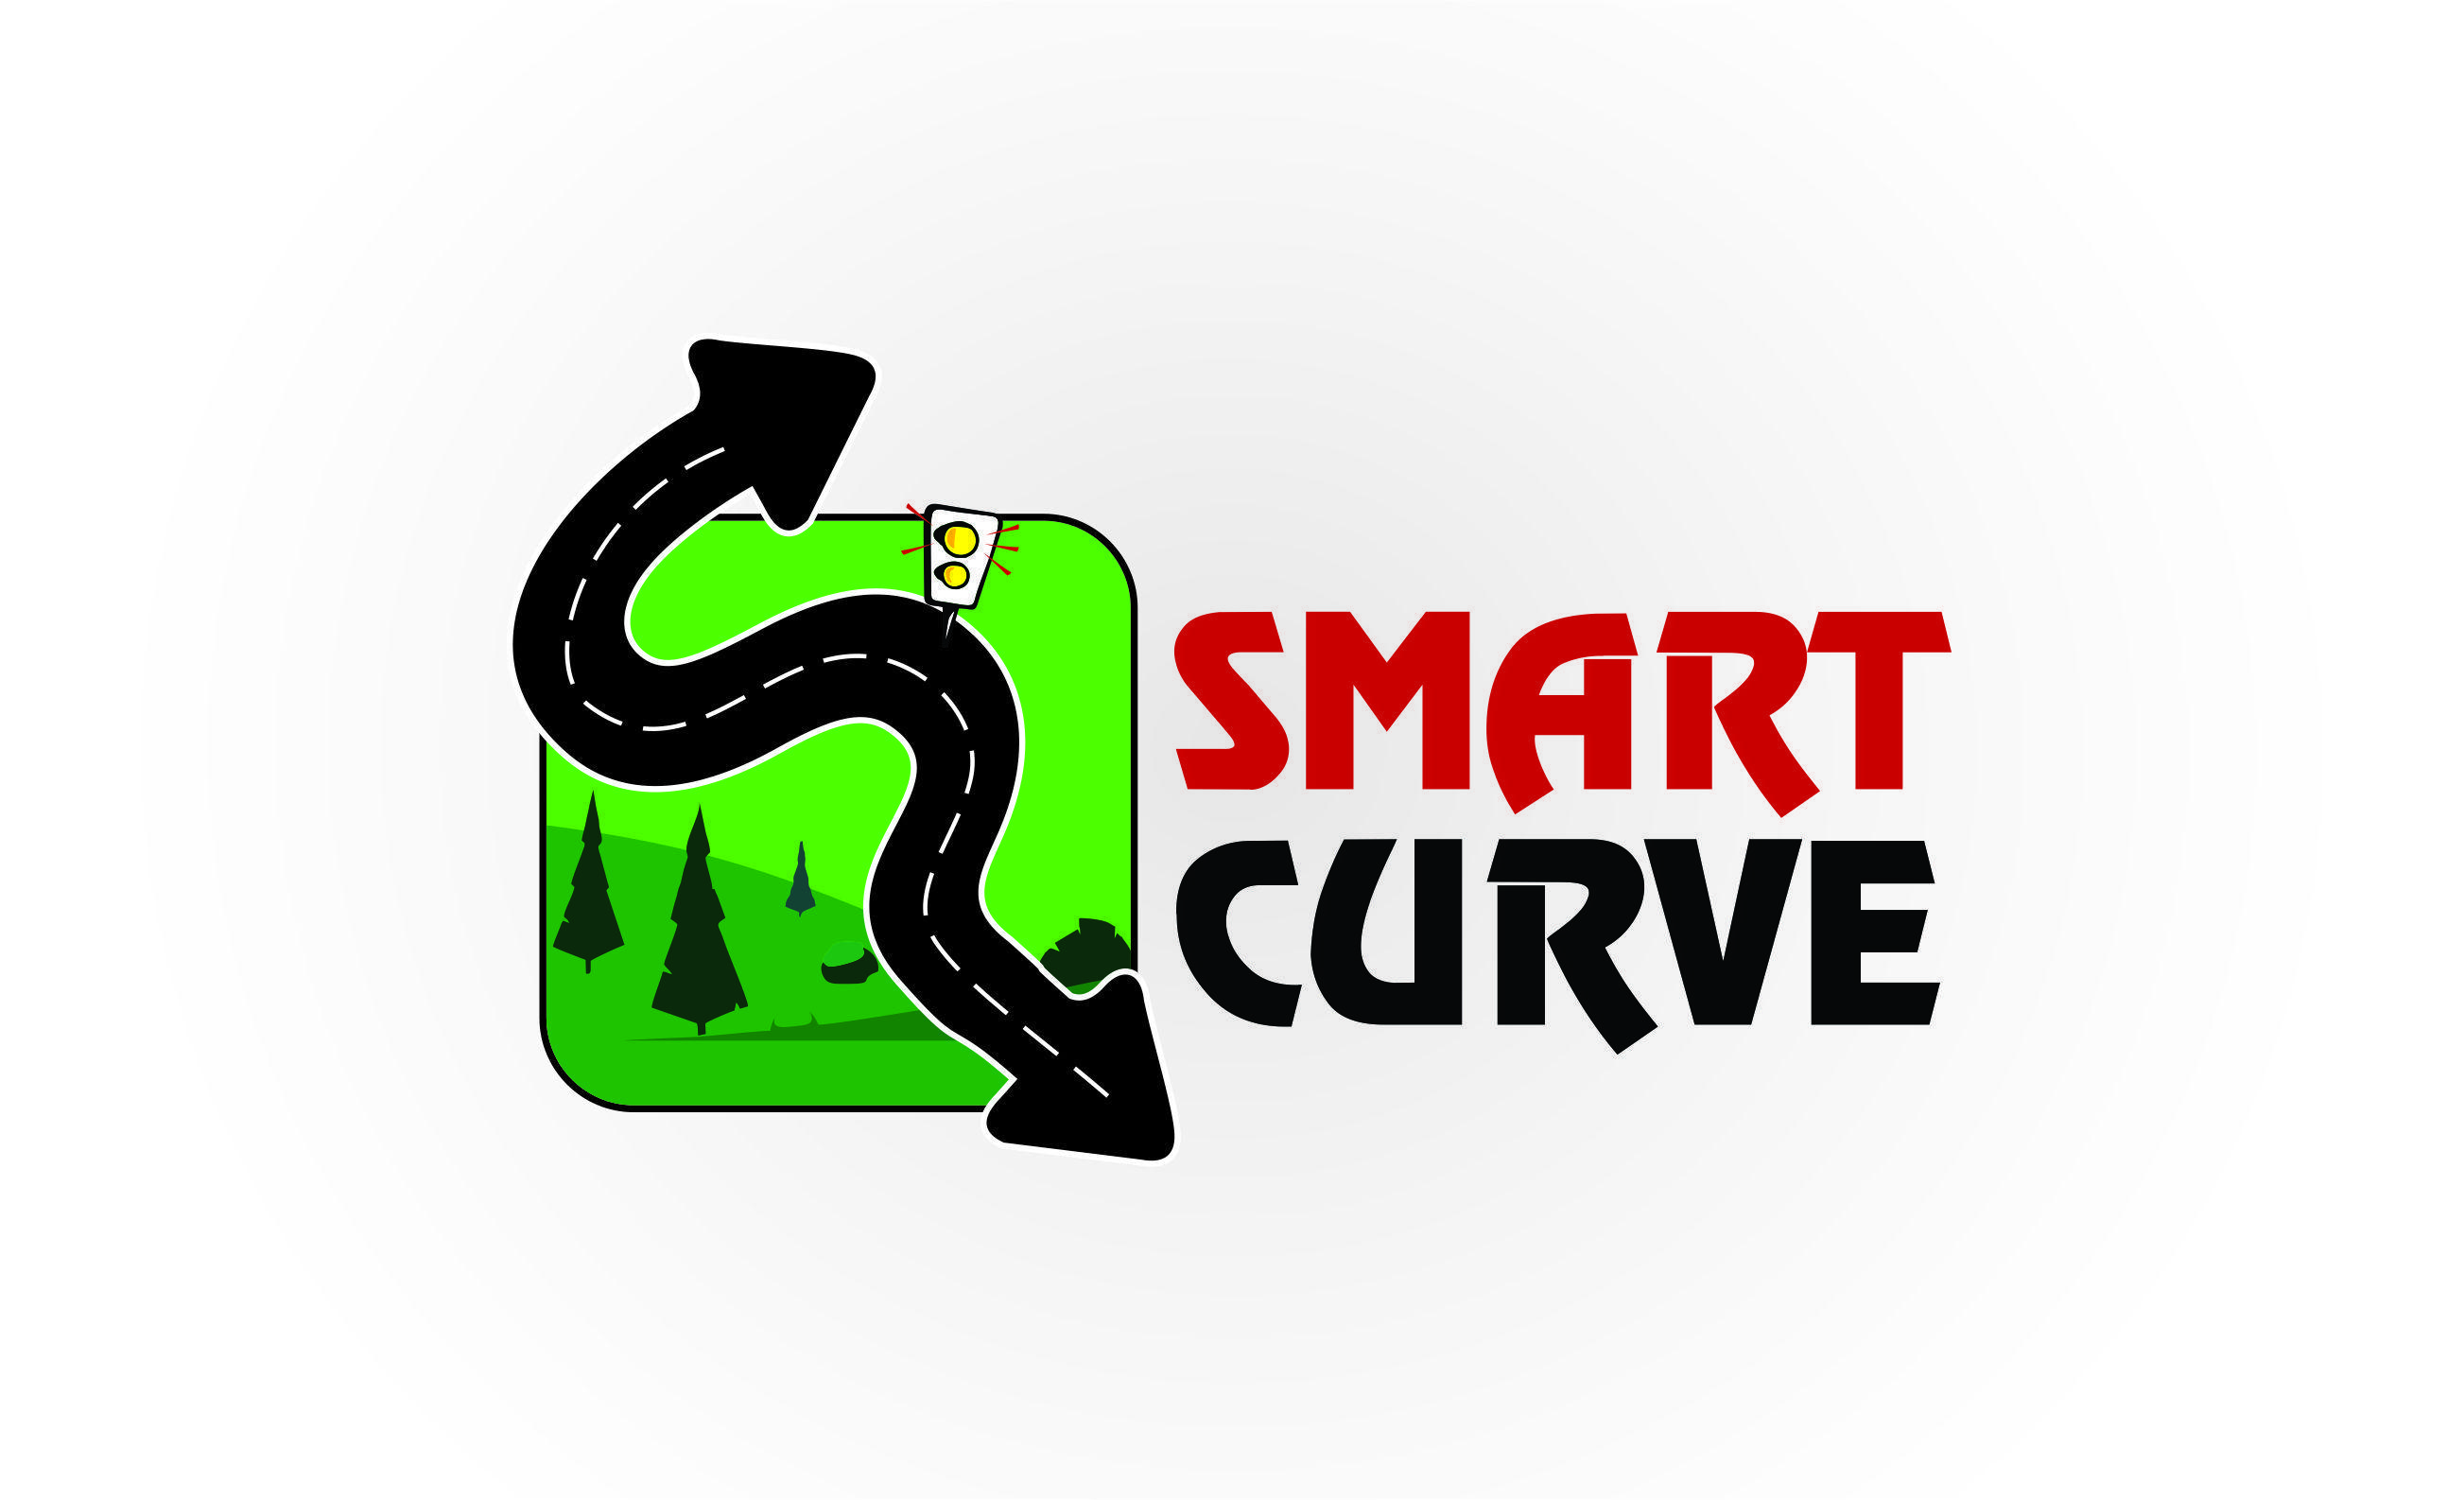 Curves Logo - Smart curve logo designed for road safety lights, which used for ...